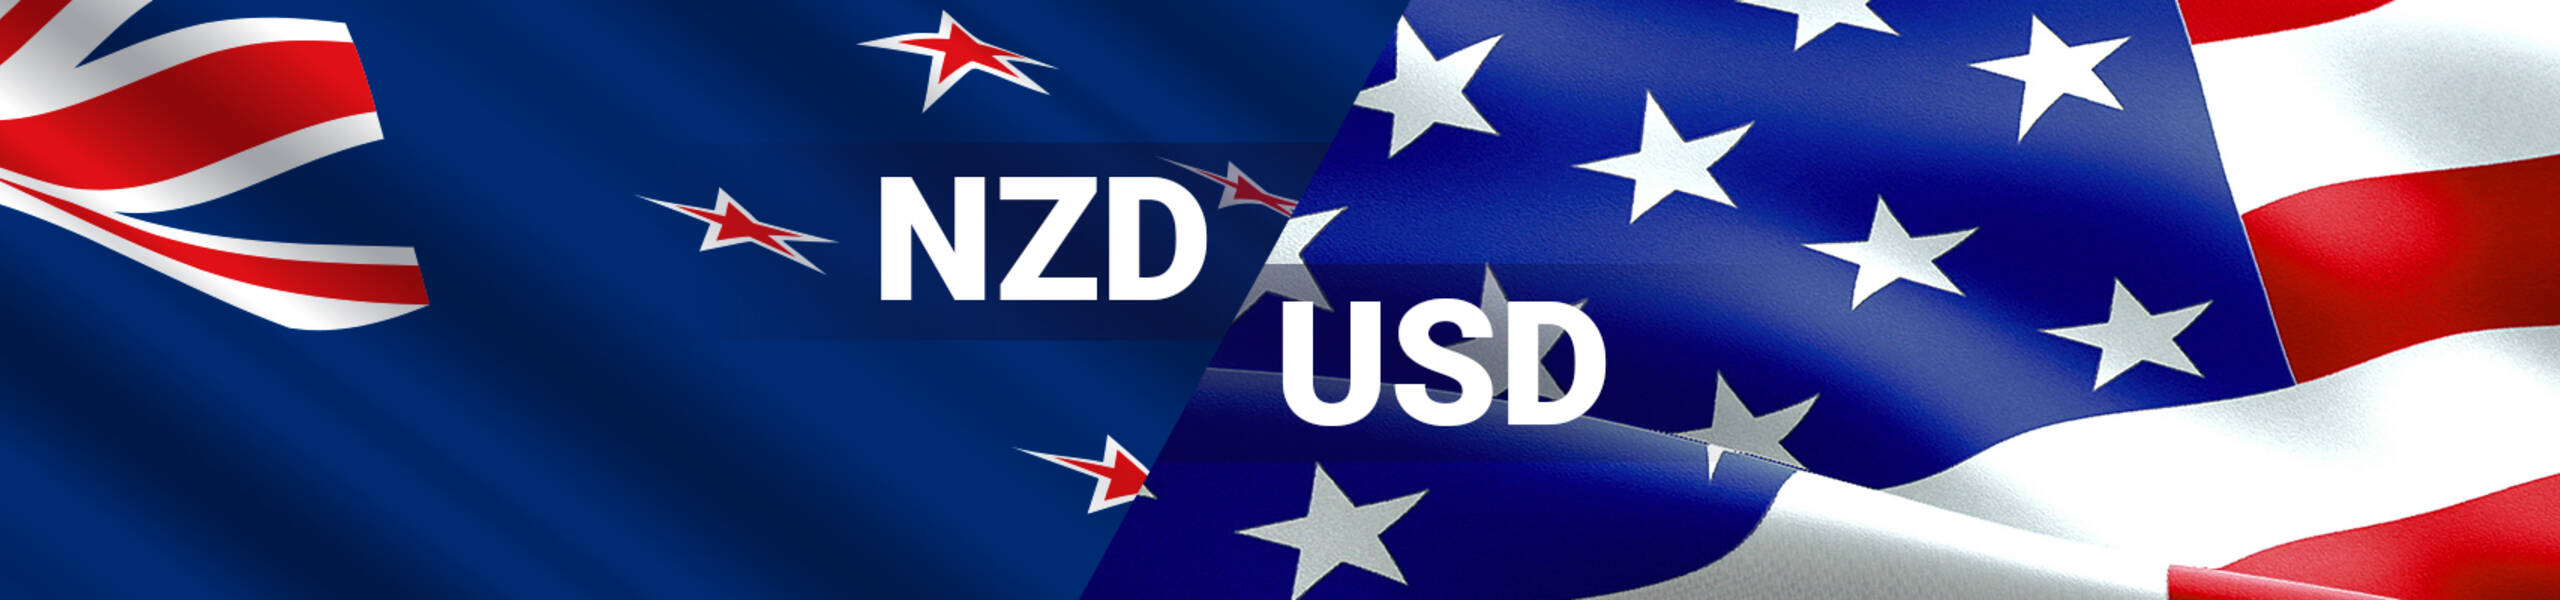 NZD/USD looking to finish a cycle